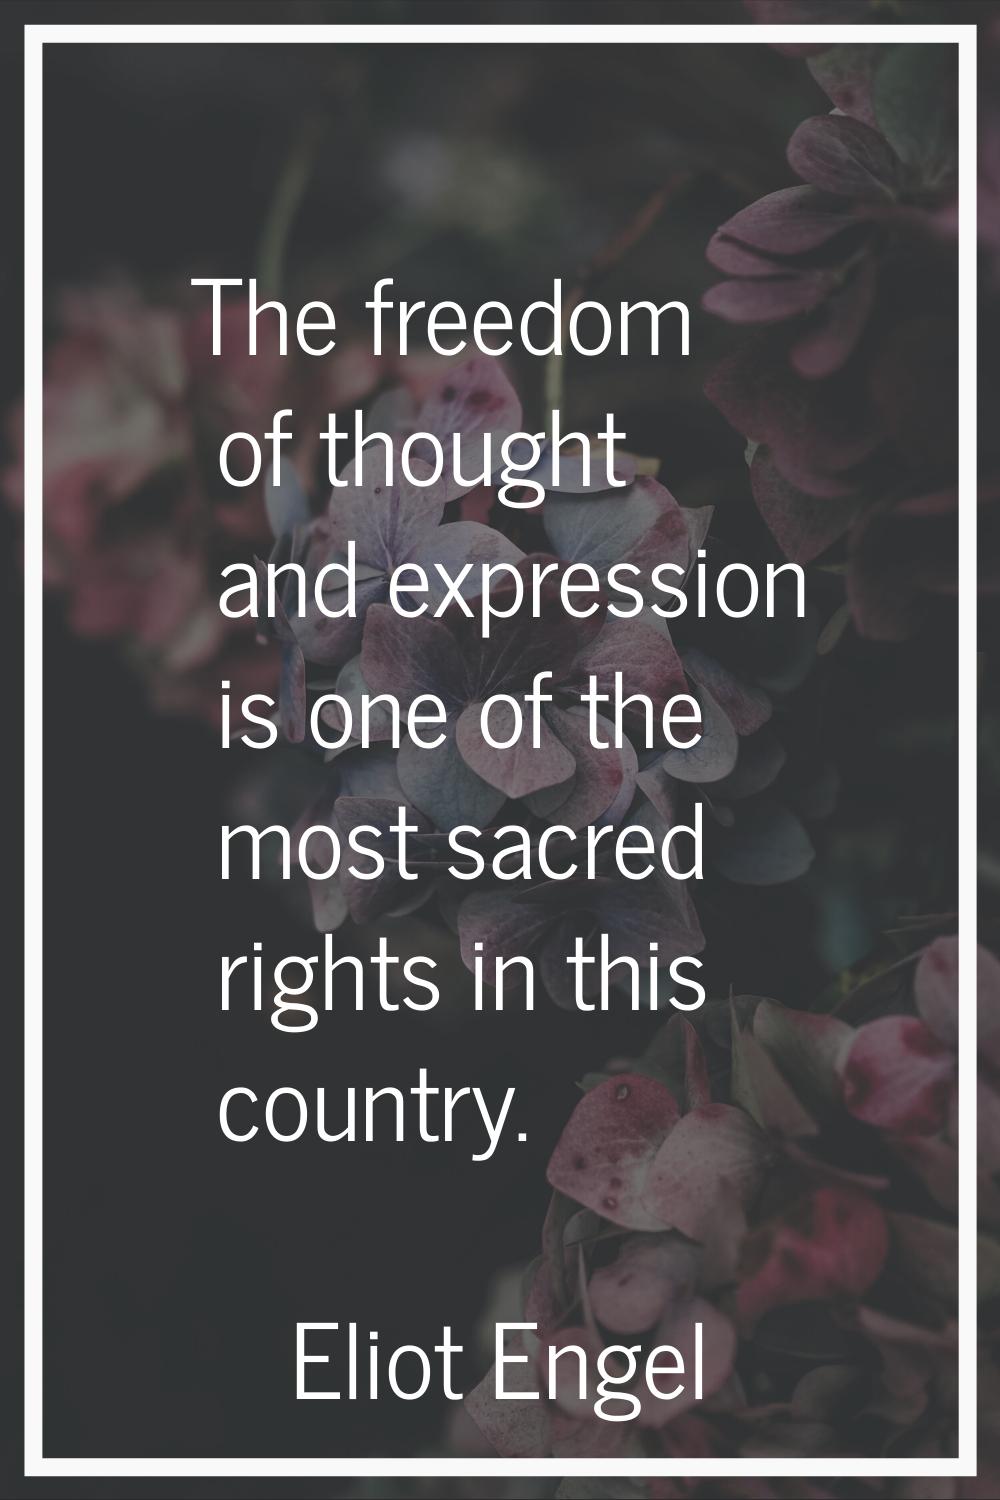 The freedom of thought and expression is one of the most sacred rights in this country.